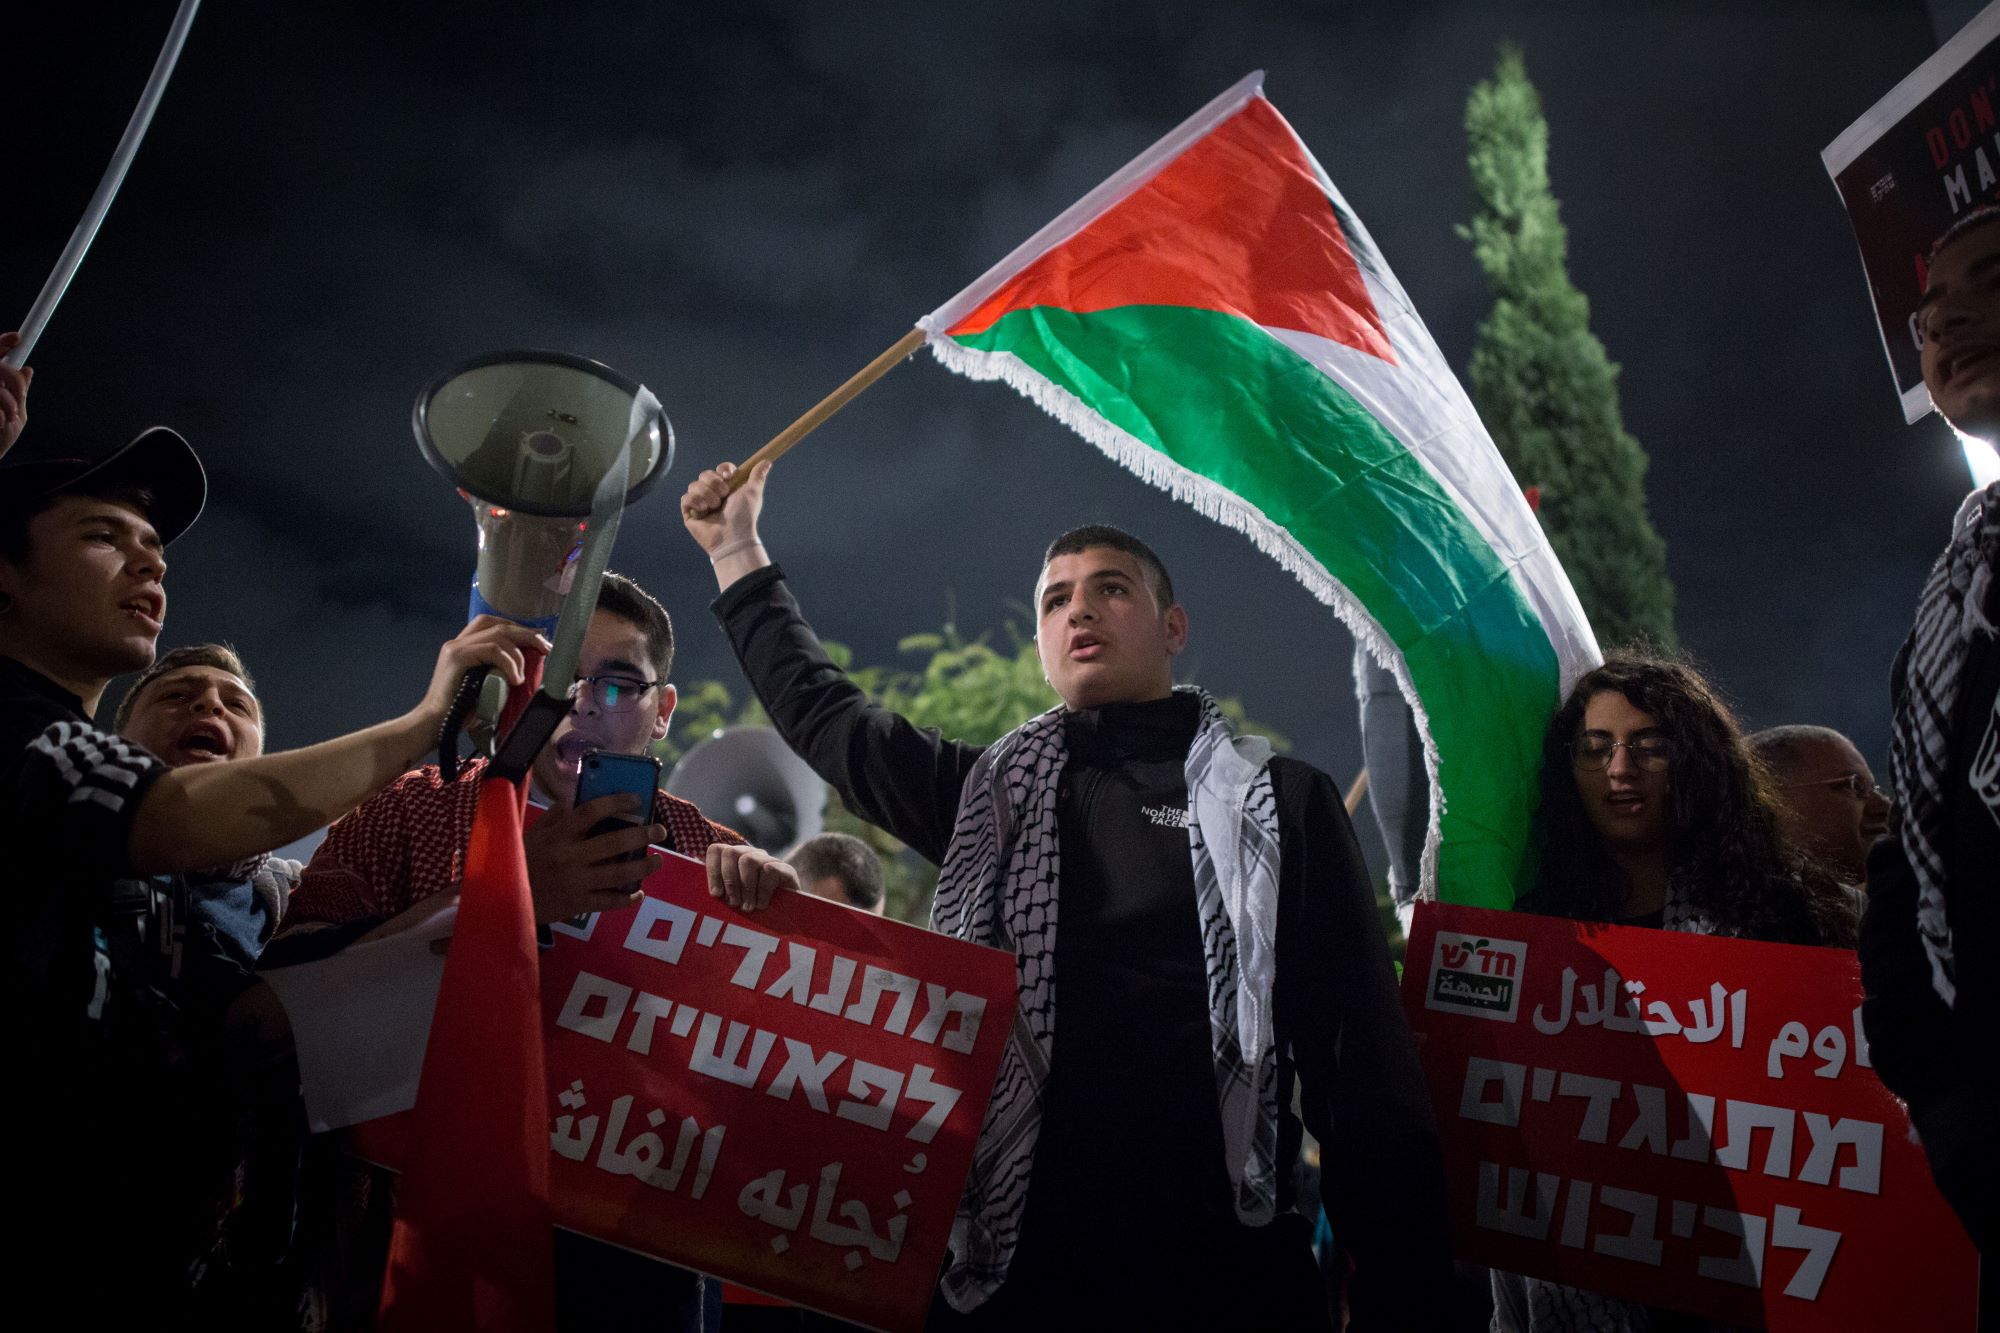 Palestinian activists demonstrate in a left-wing protest against US President Donald Trump's 'peace plan' in Tel Aviv, February 1, 2020. (Miriam Alster/Flash90)